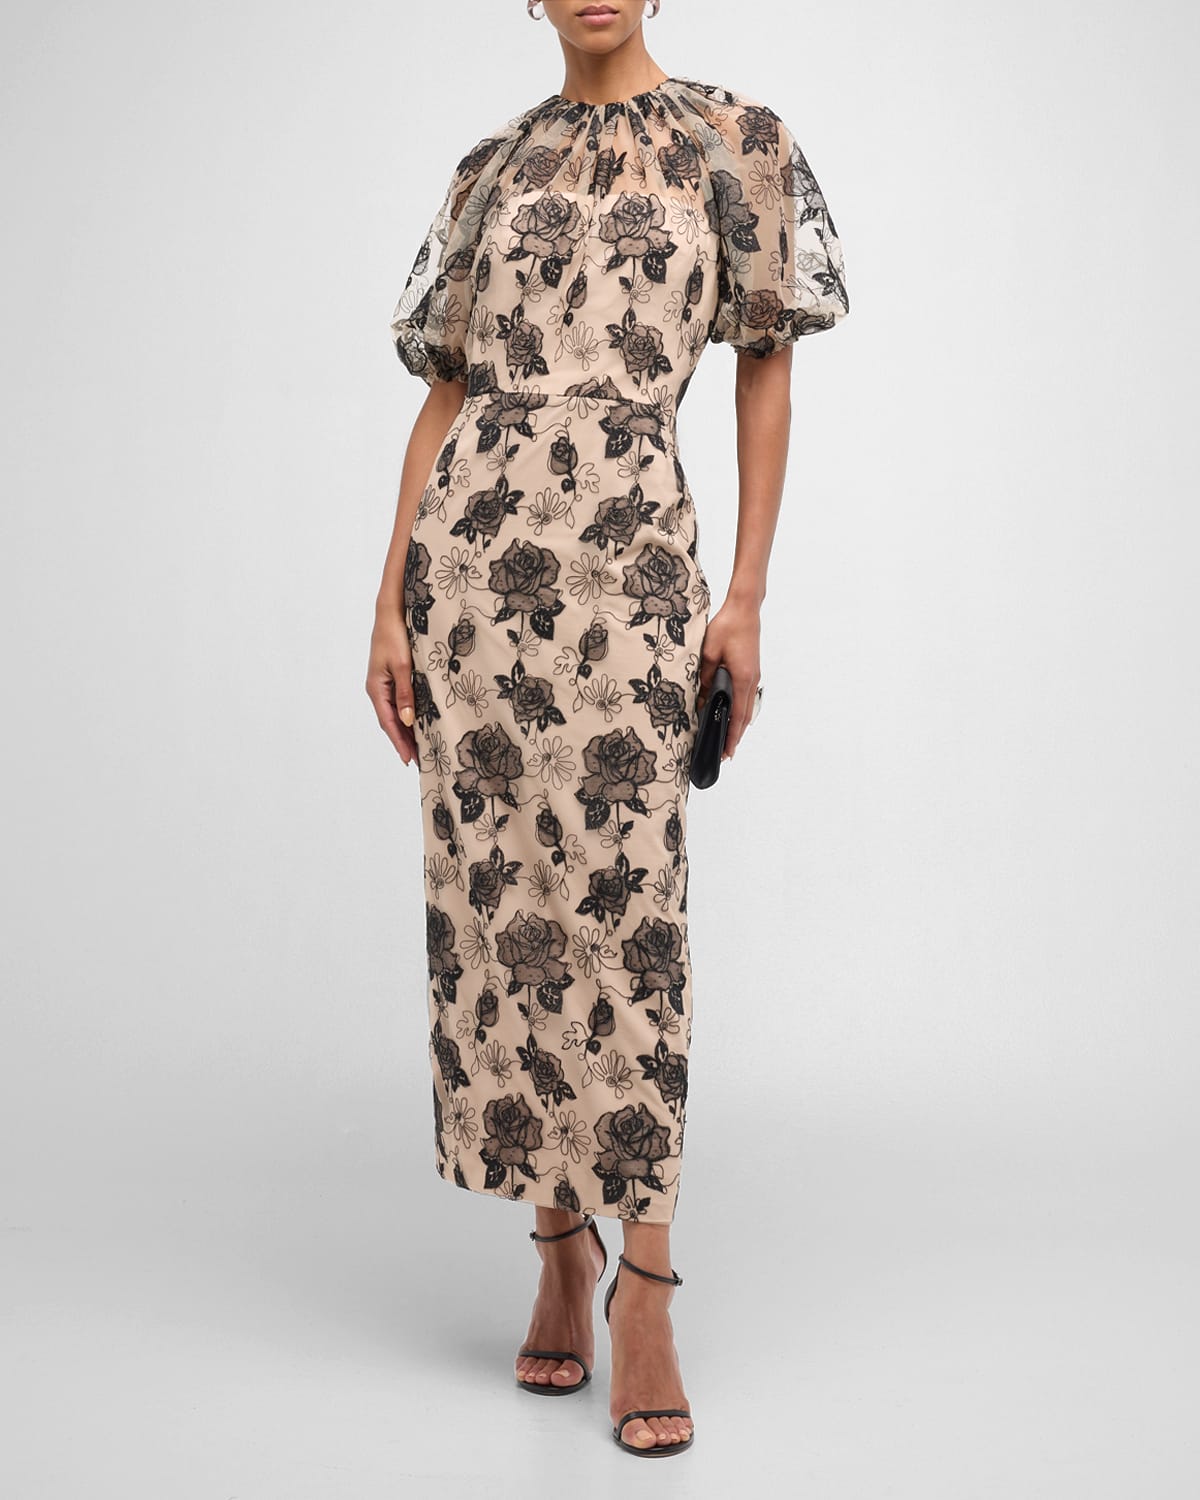 Lela Rose Naomi Sheath Dress With Floral Embroidery In Beige